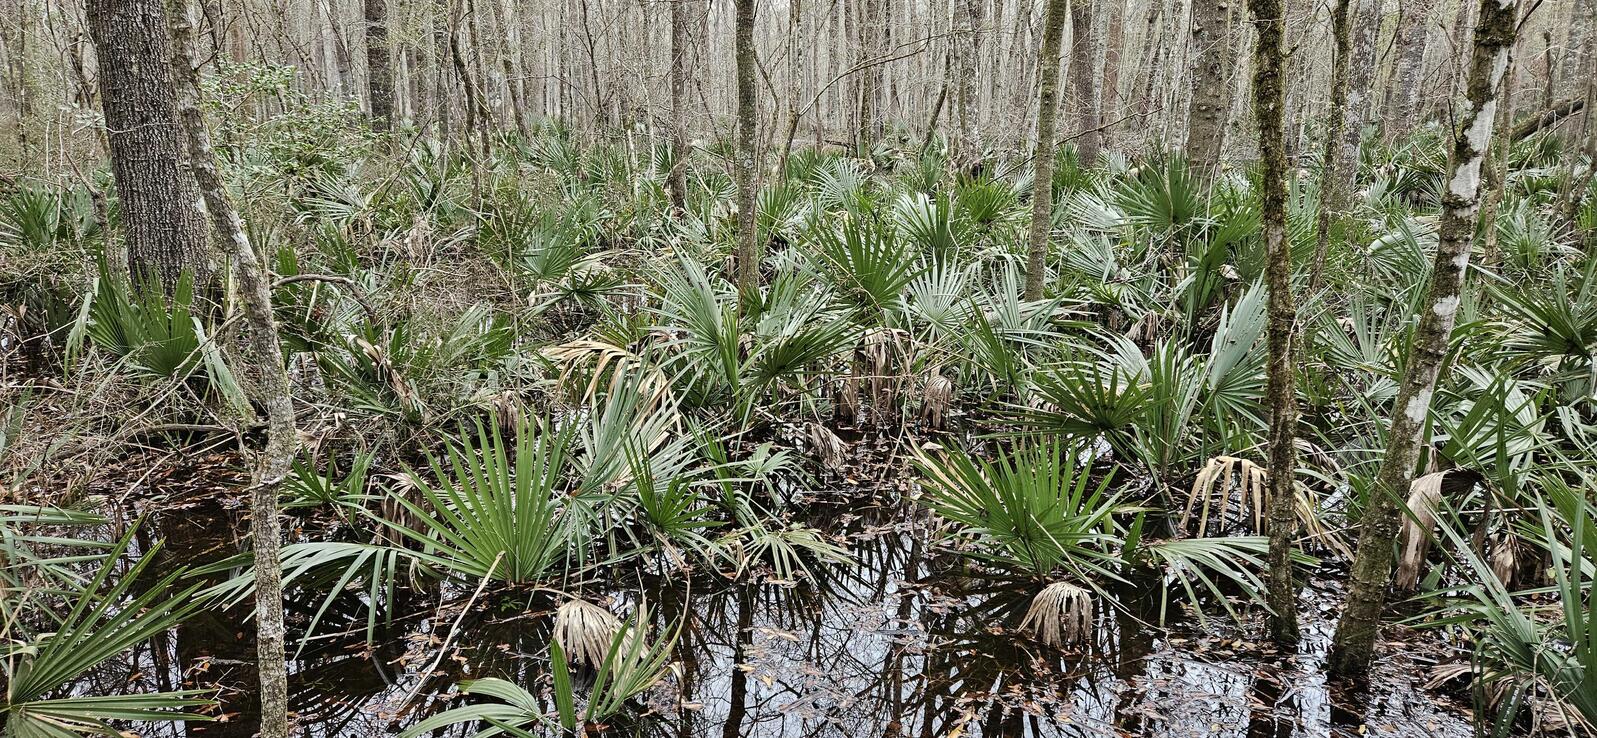 Palmettos rise out of black water, the trees all around them having no leaves since it is winter.